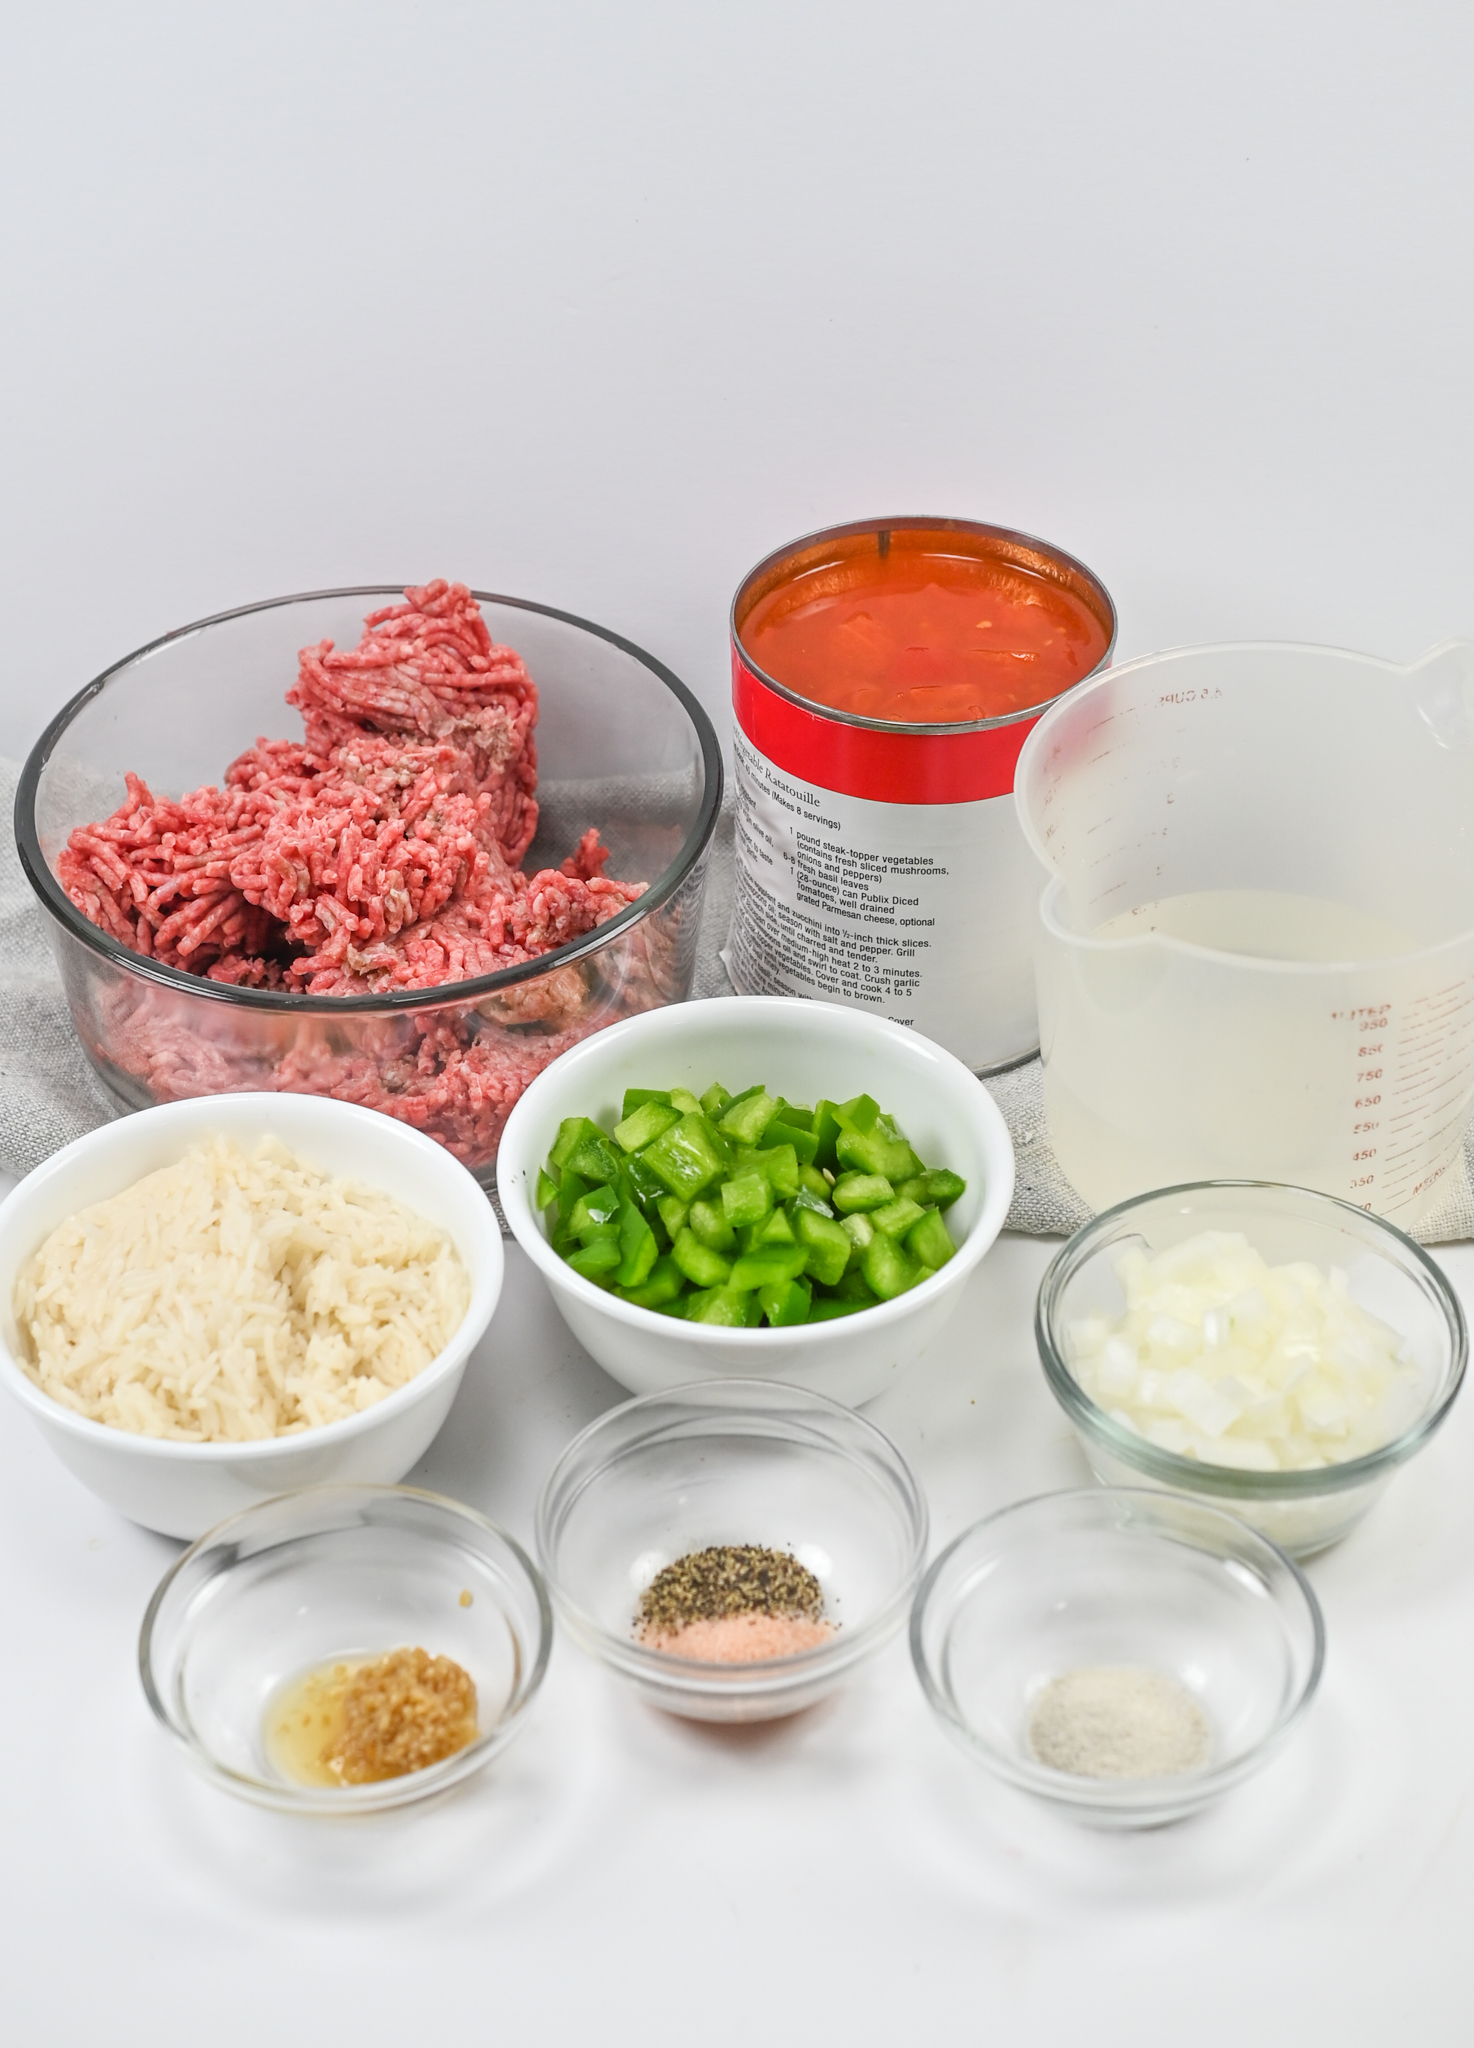 The ingredients laid out on a white surface for Unstuffed Pepper Soup.